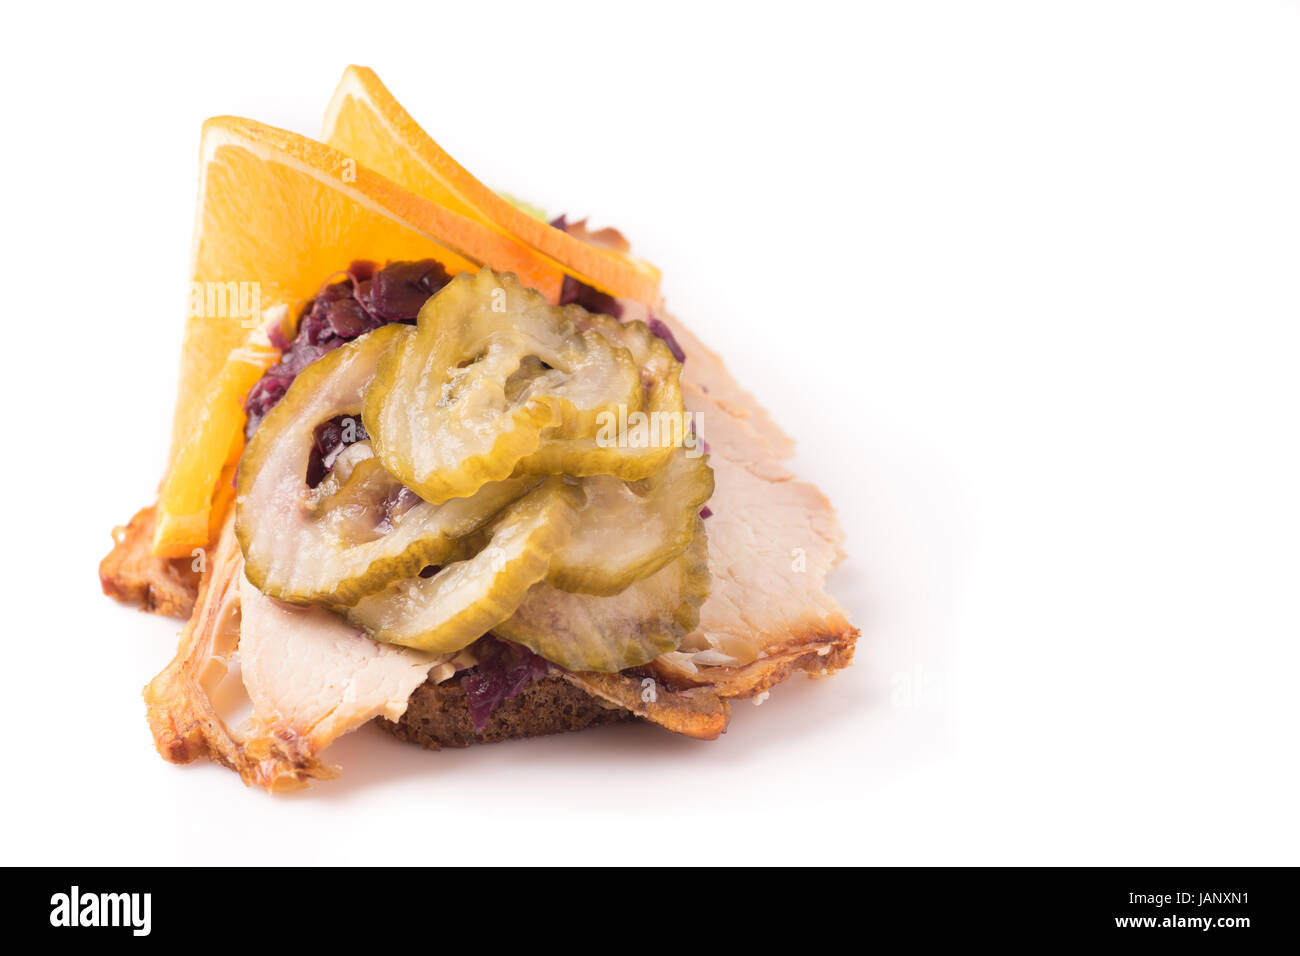 Danish specialties and national dishes, high-quality open sandwich. Roasted Pork belly and Pickled red cabbage and orange isolated on white background Stock Photo